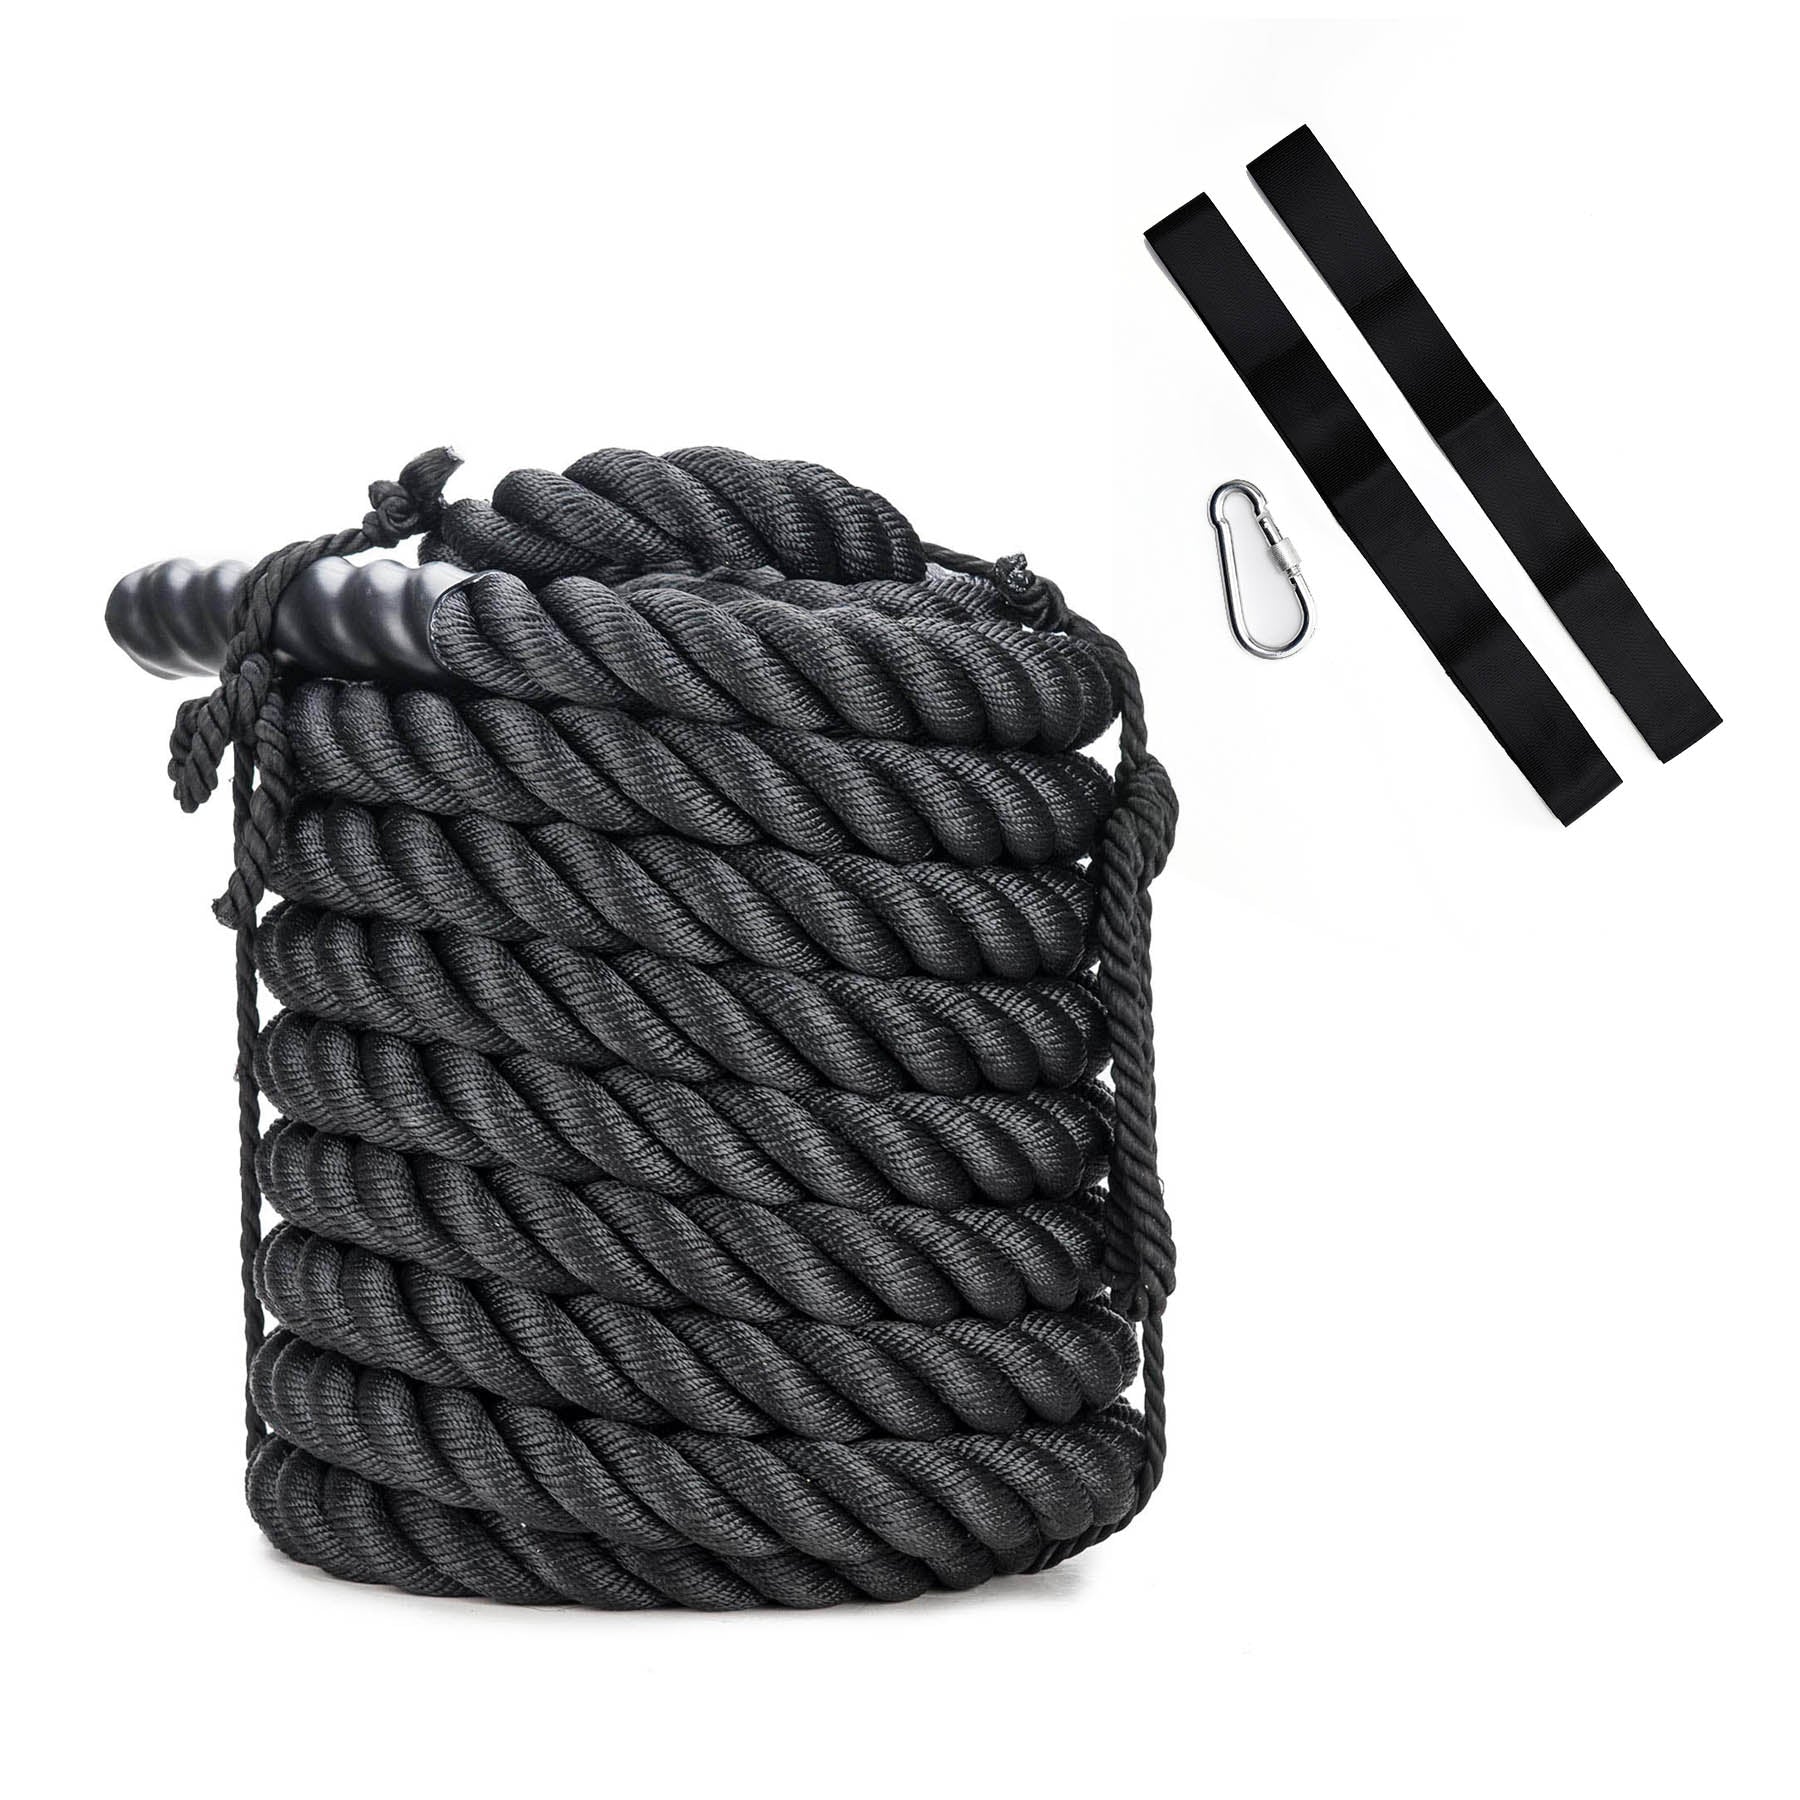 RIO PORT strenghts exercise training gym battle rope 50 ft (15